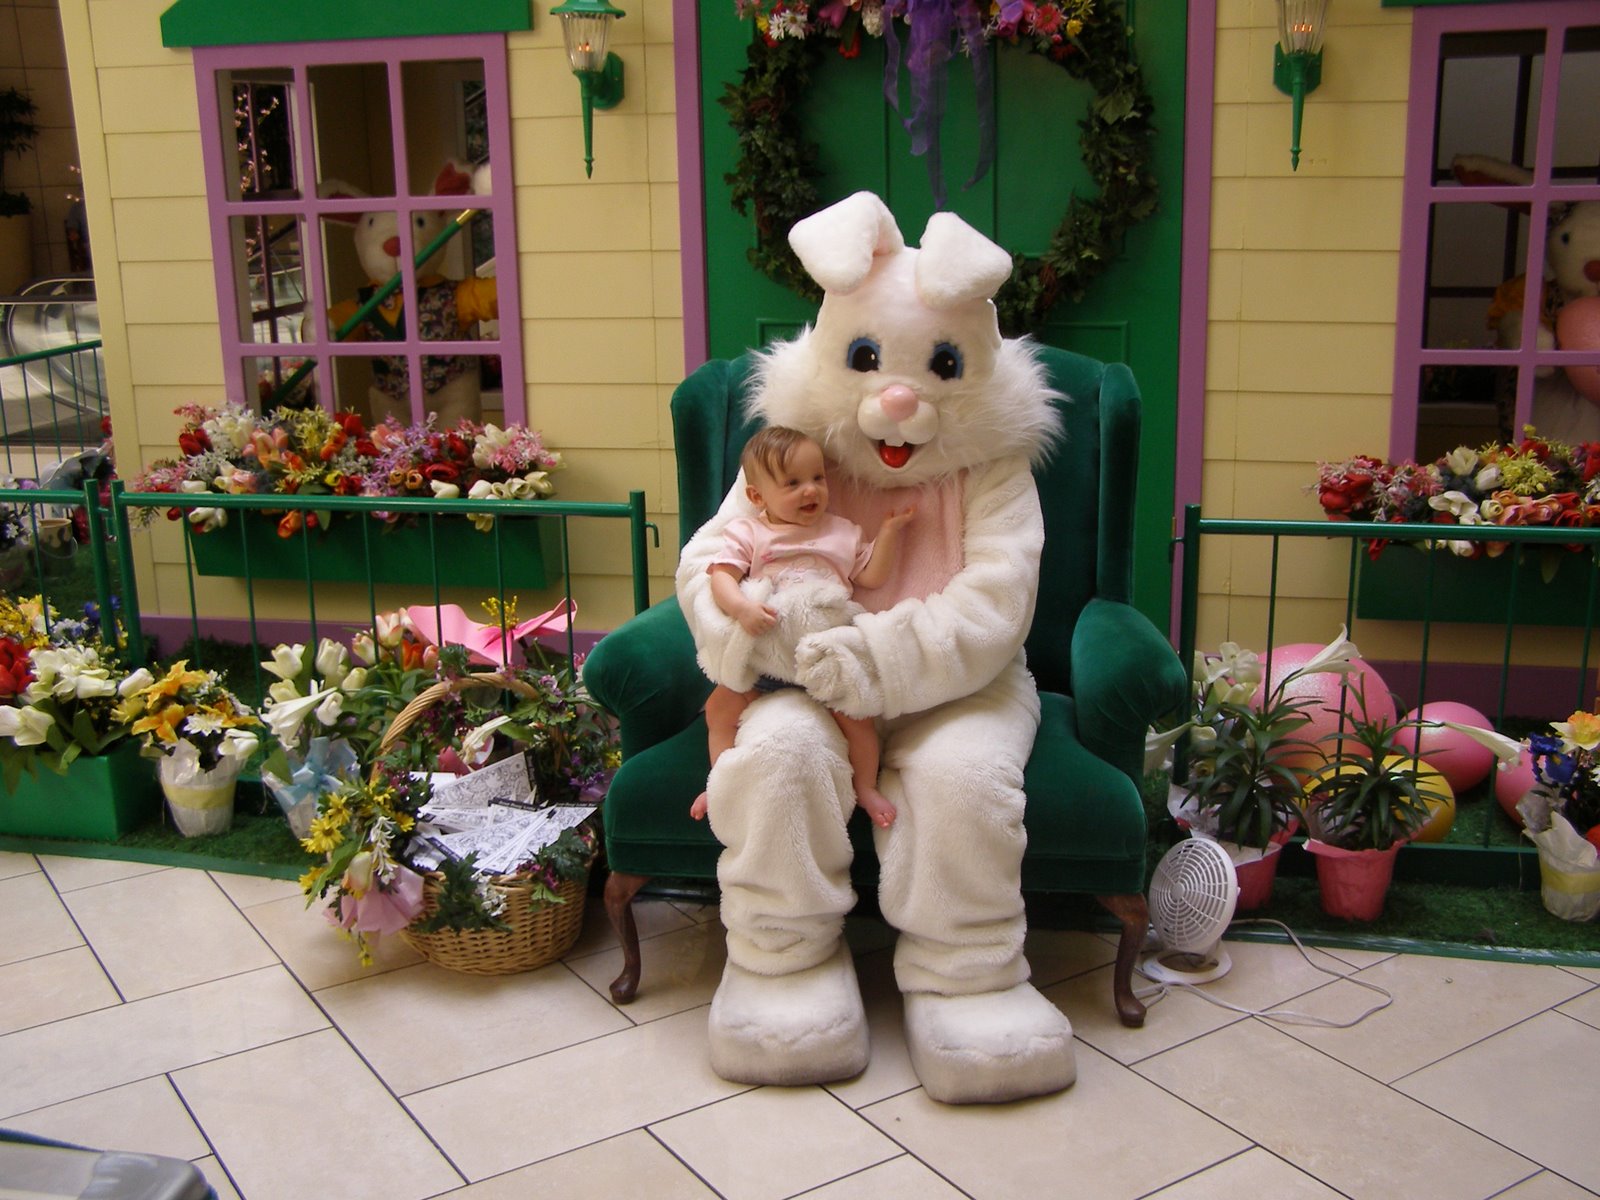 [Visit+to+the+Easter+Bunny+002.jpg]